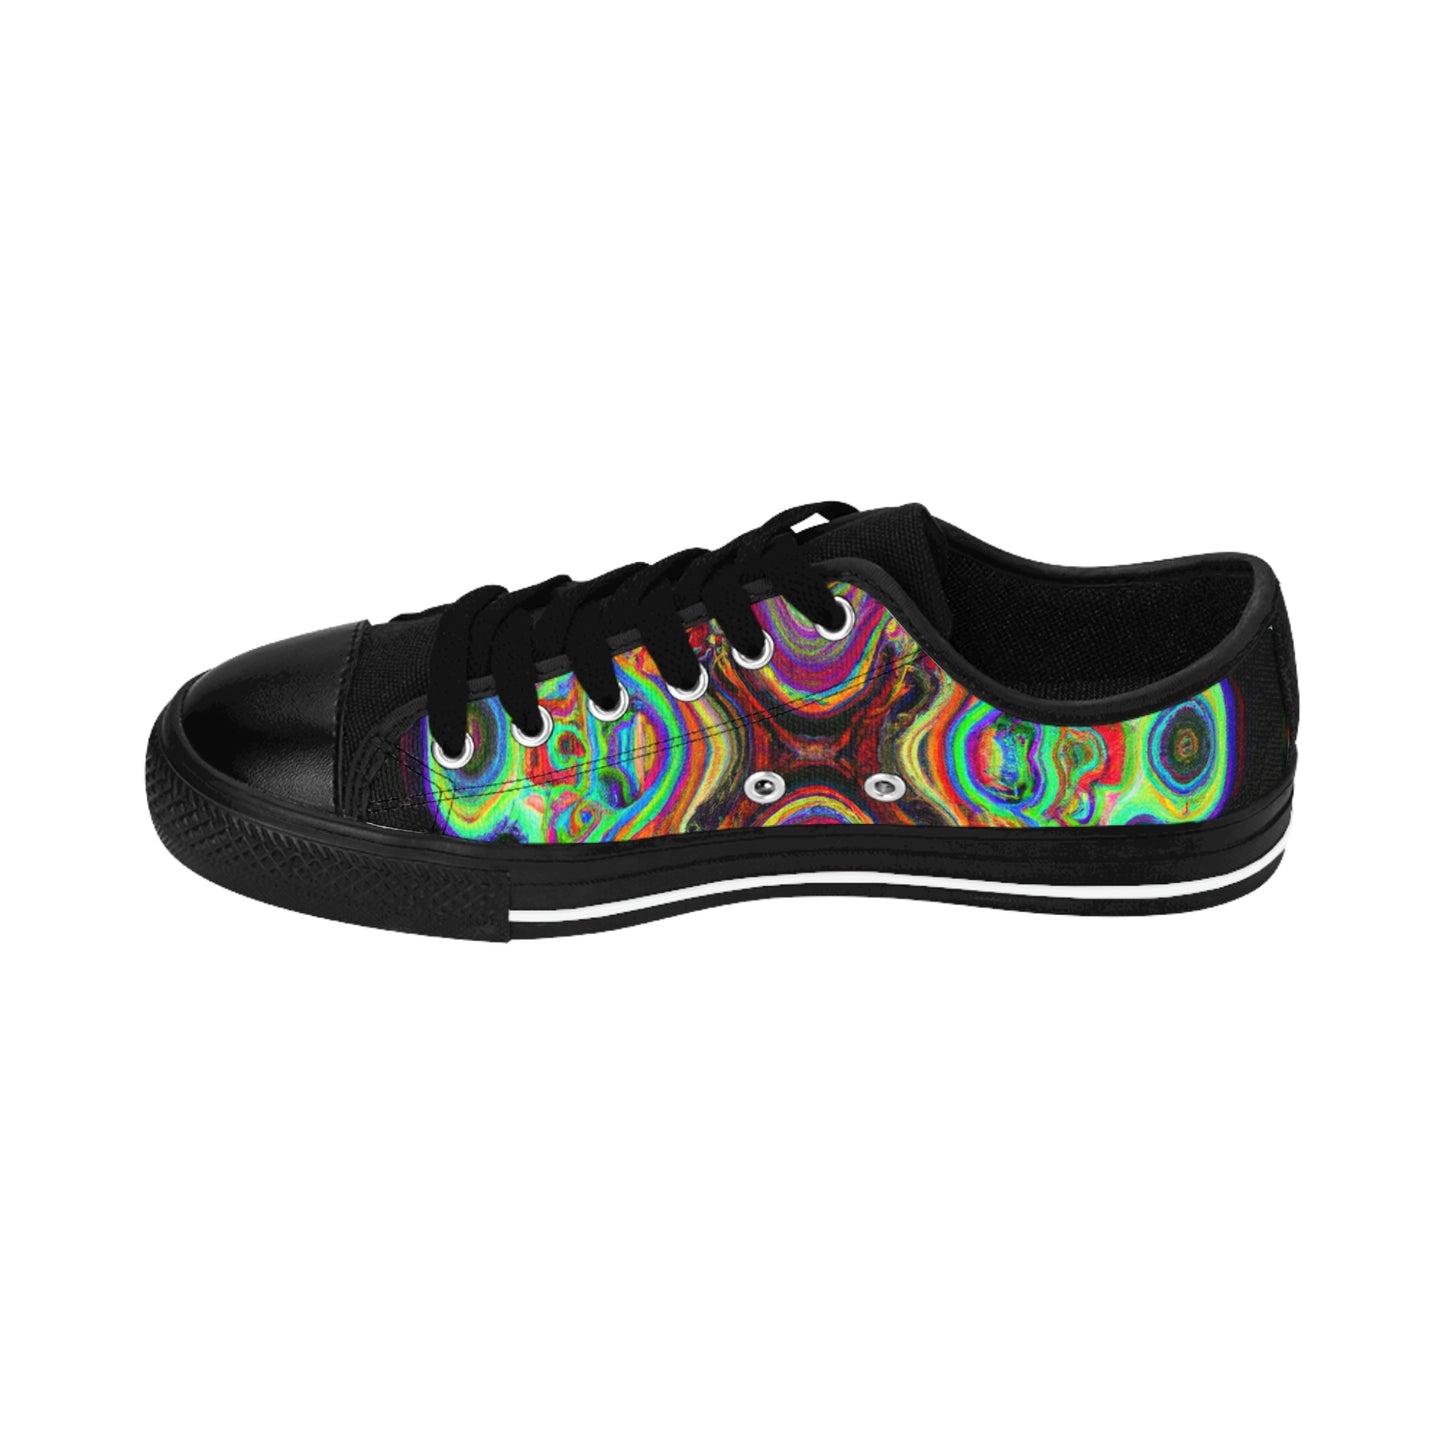 Oswin the Unstoppable - Psychedelic Low Top